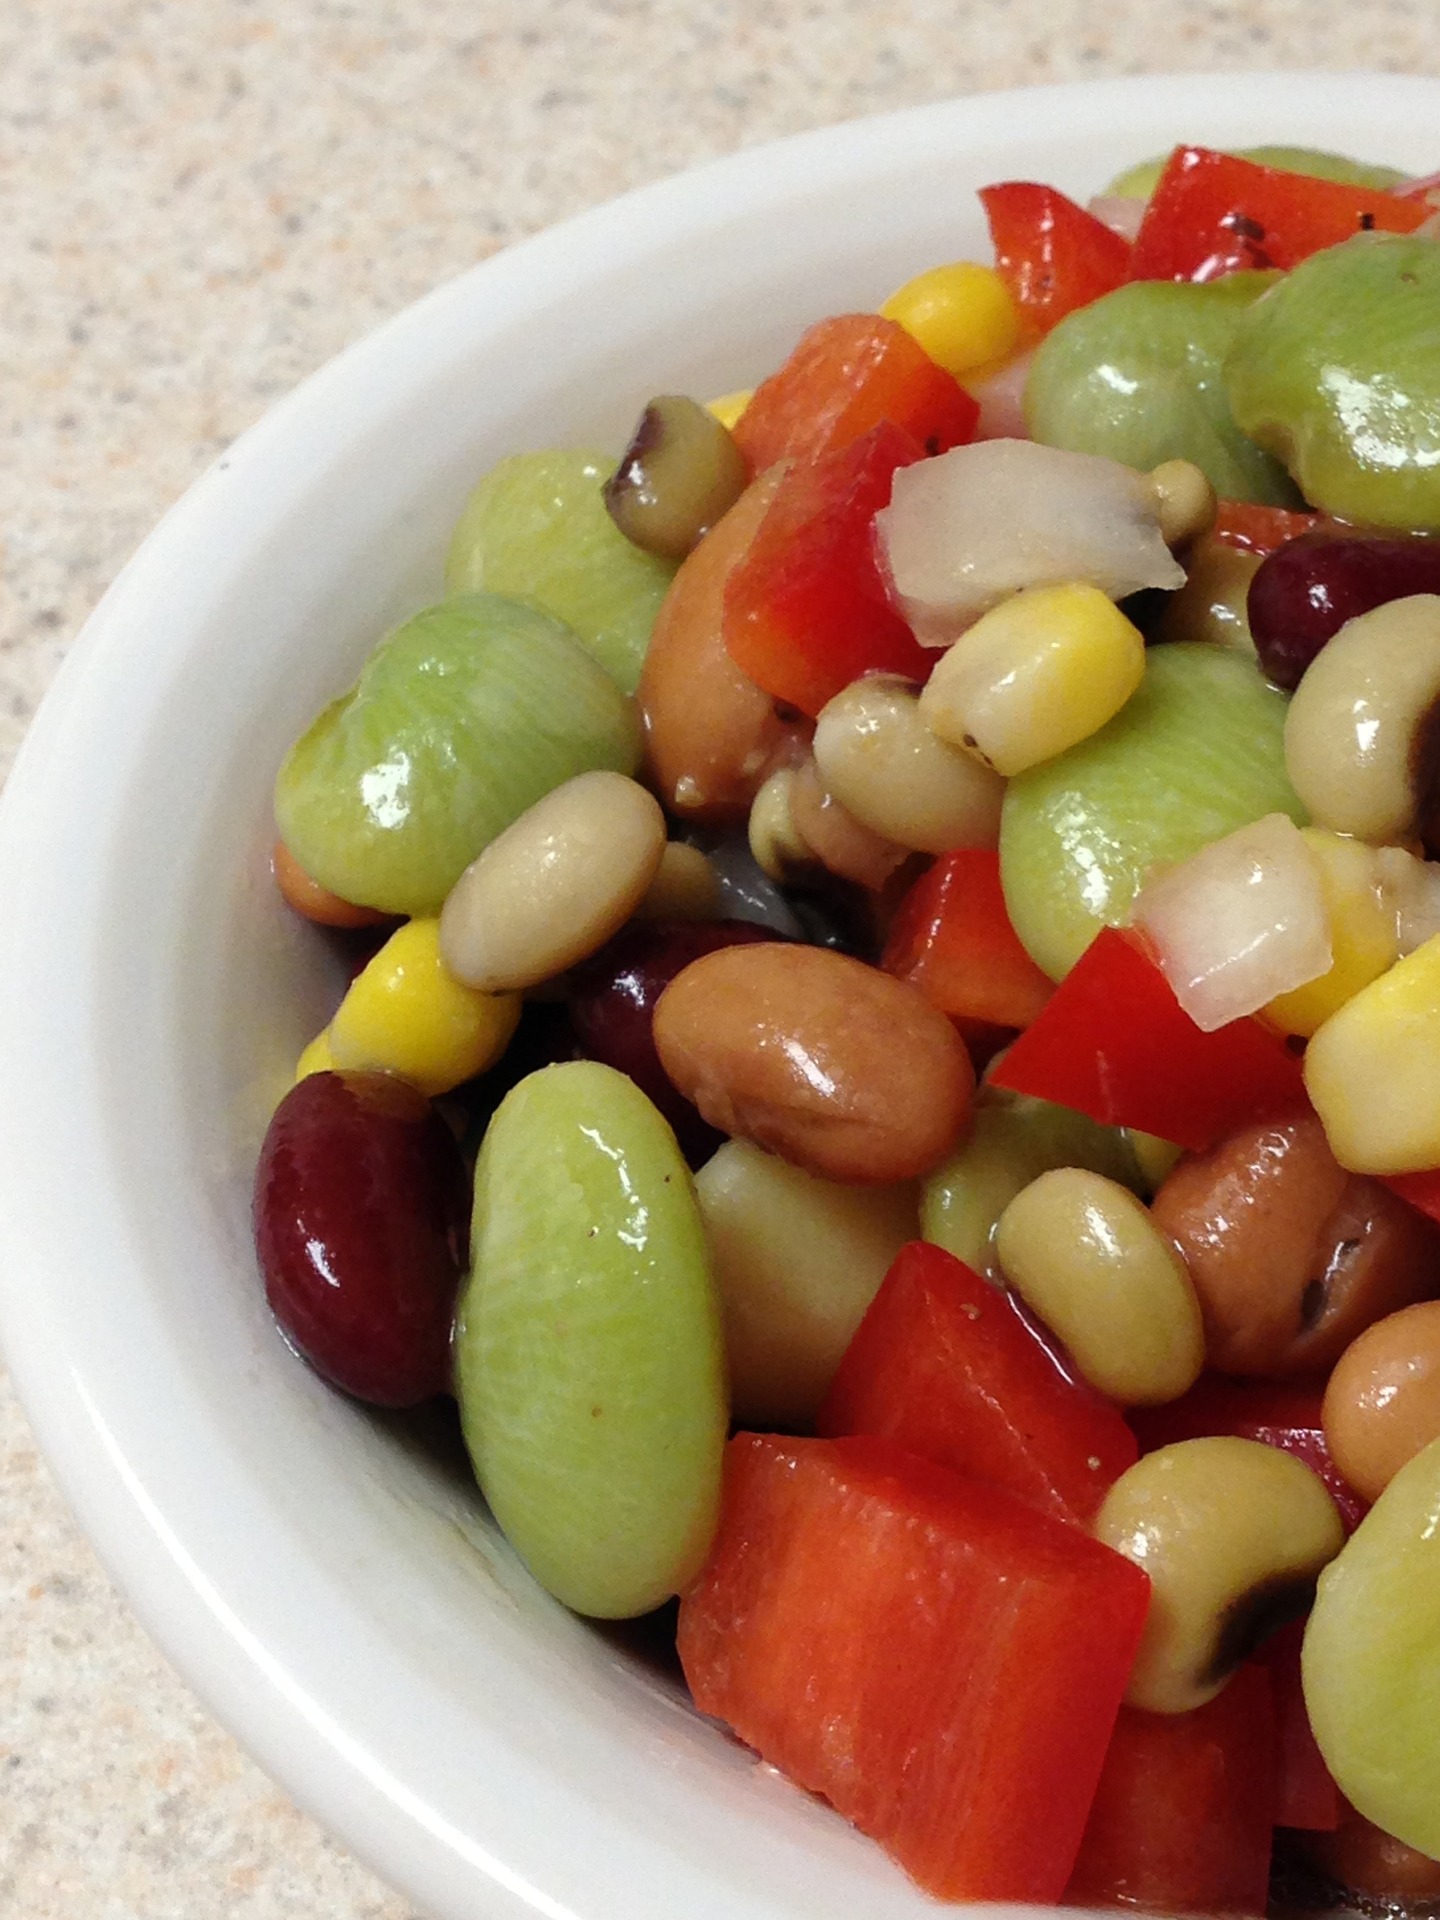 Beans and other ingredients in a salad